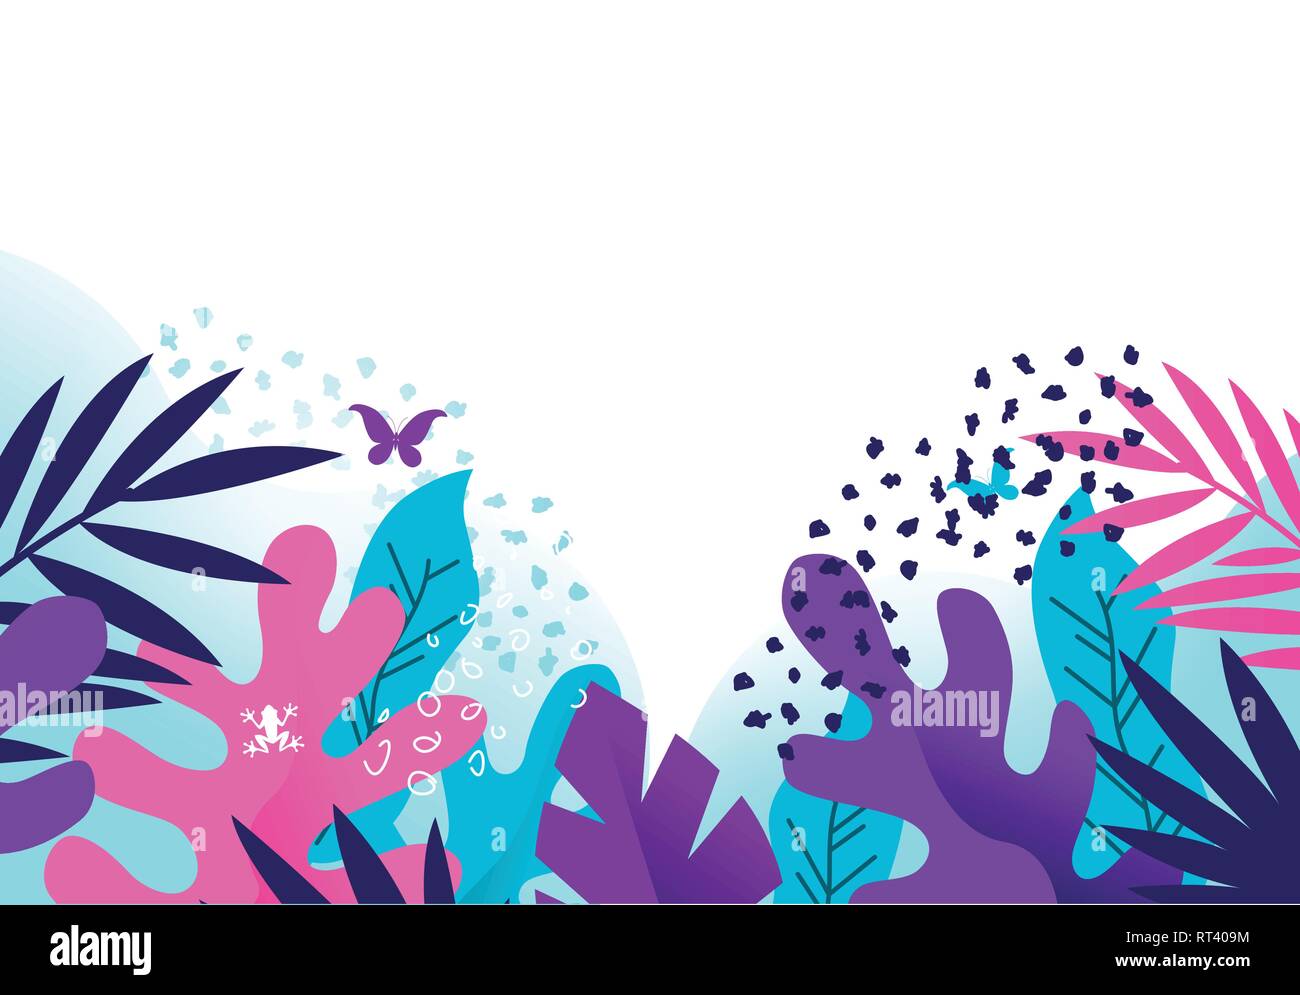 Bright and colourful creative floral plants based background with textures. Vector illustration. Stock Vector